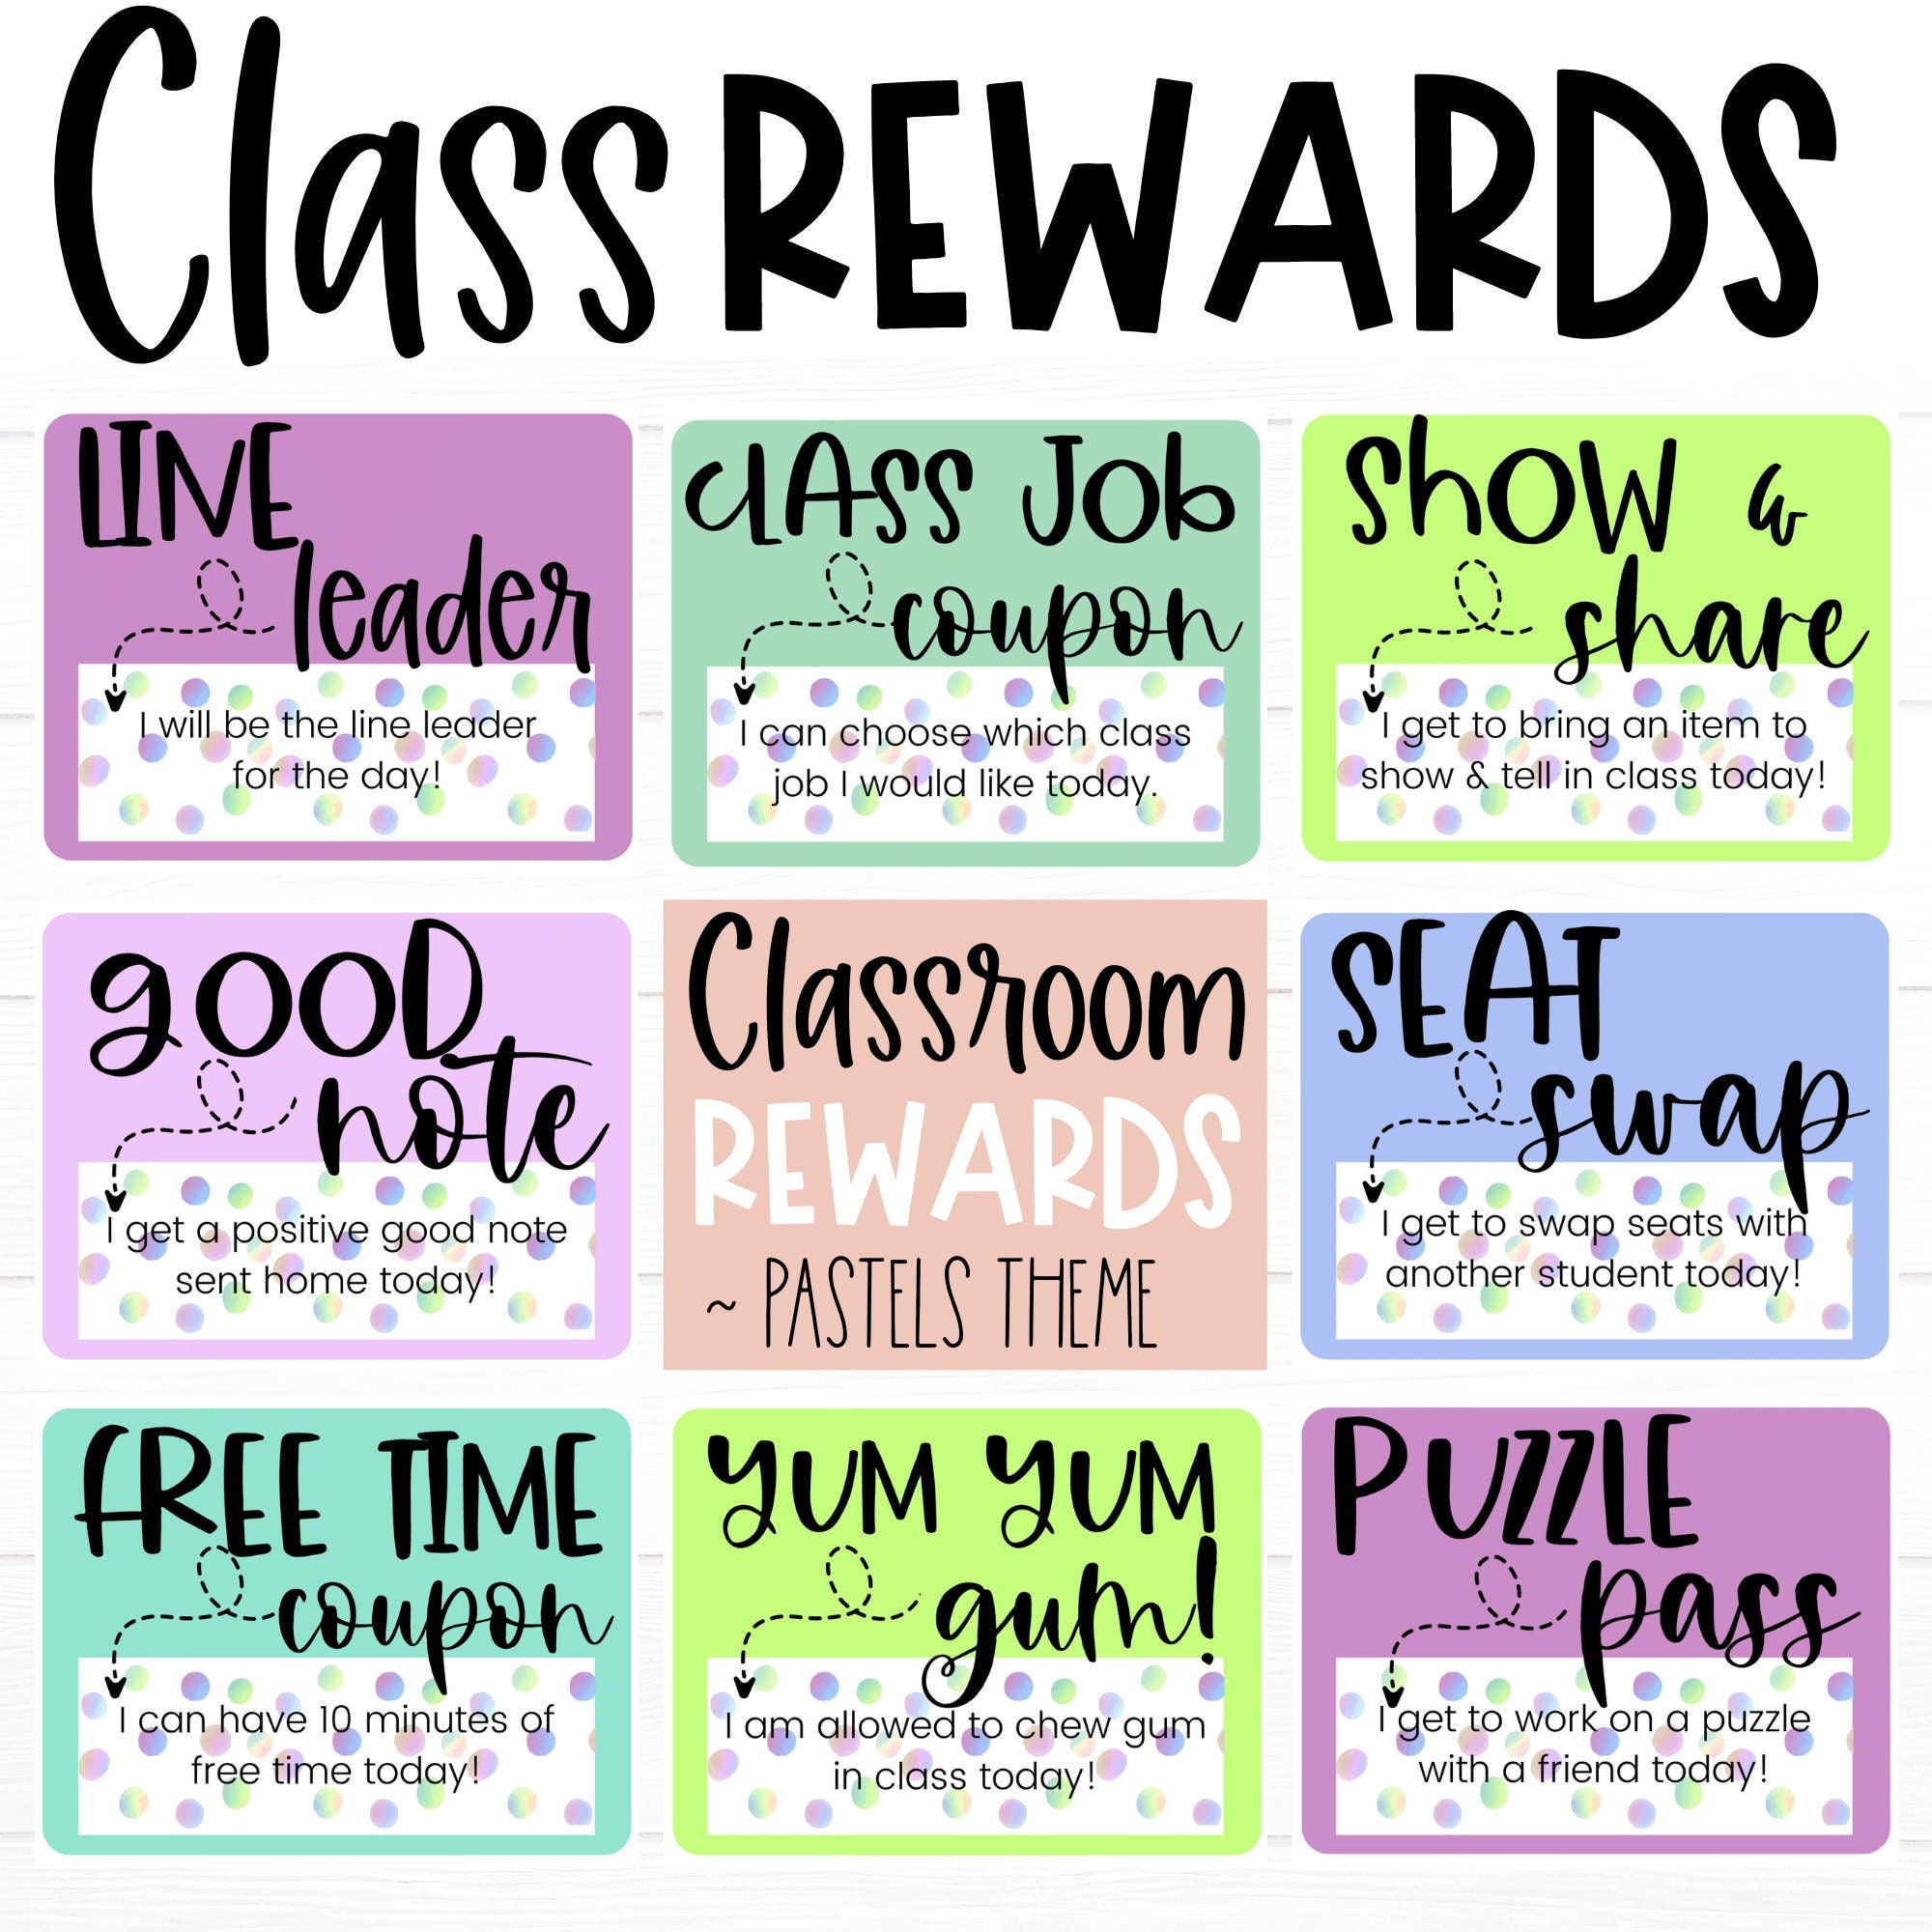 Classroom Coupons by Shakin it up with Mrs Shannon